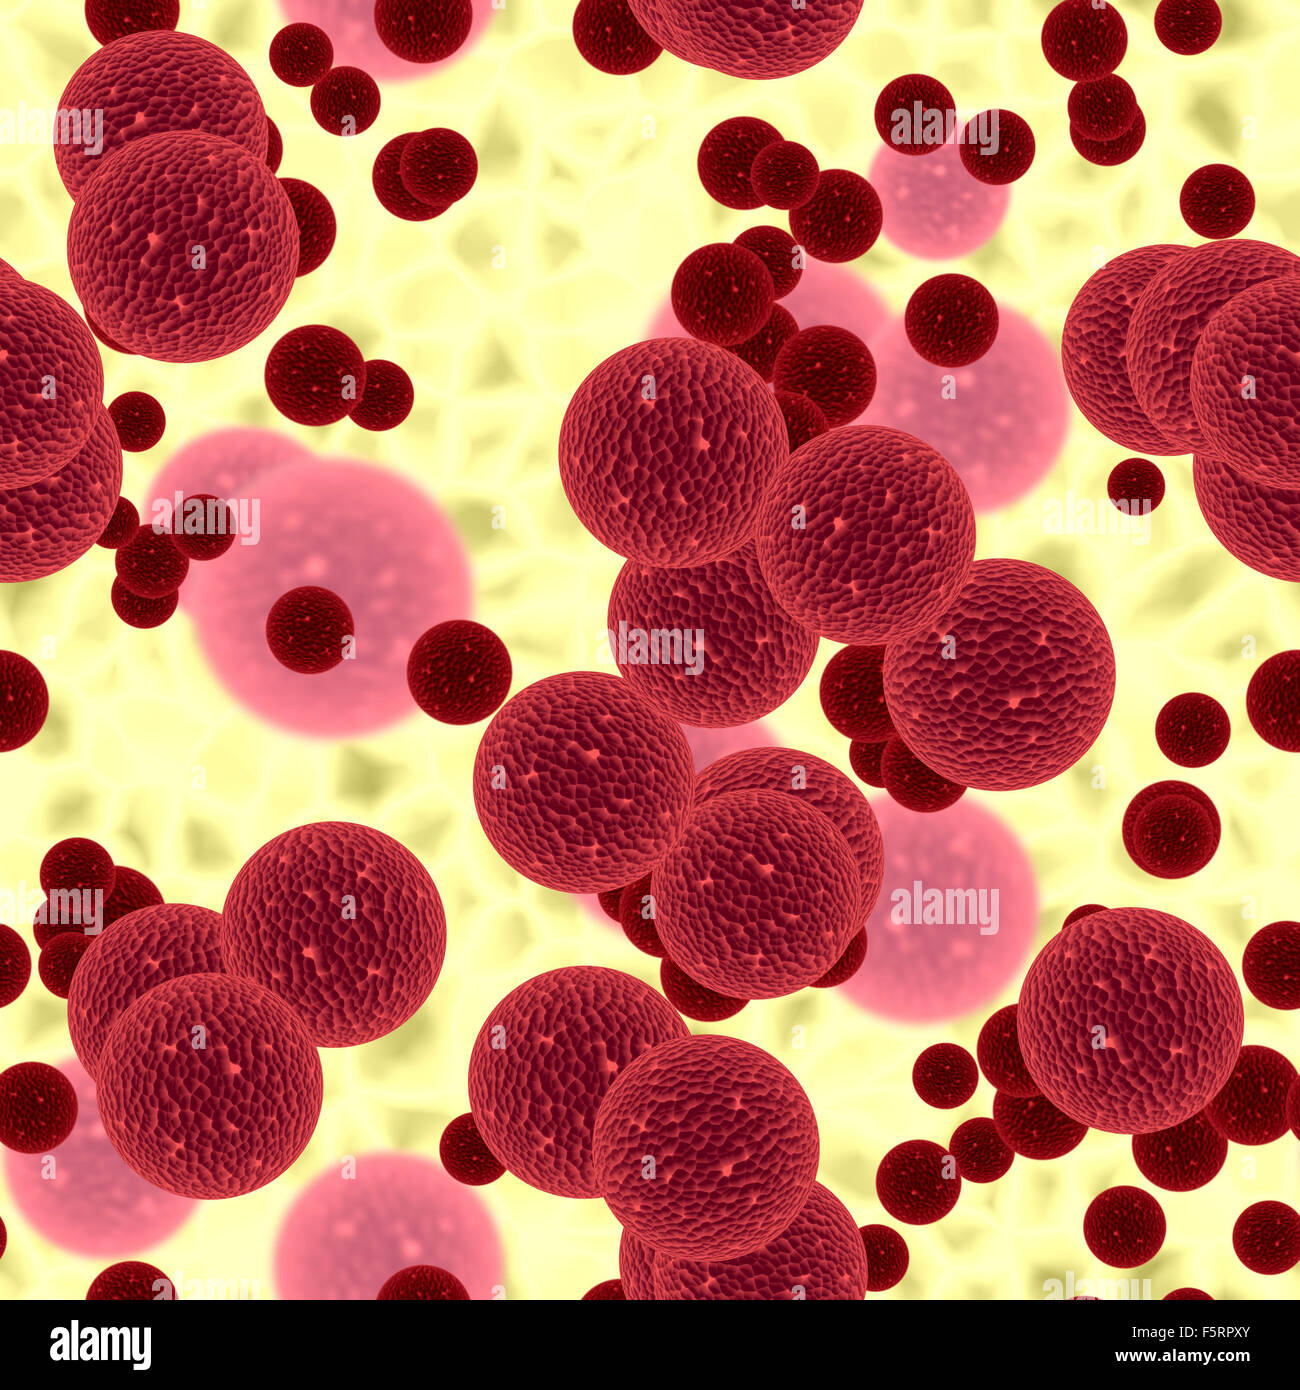 Seamless background of red cells in microscope, abstract illustration. Stock Photo